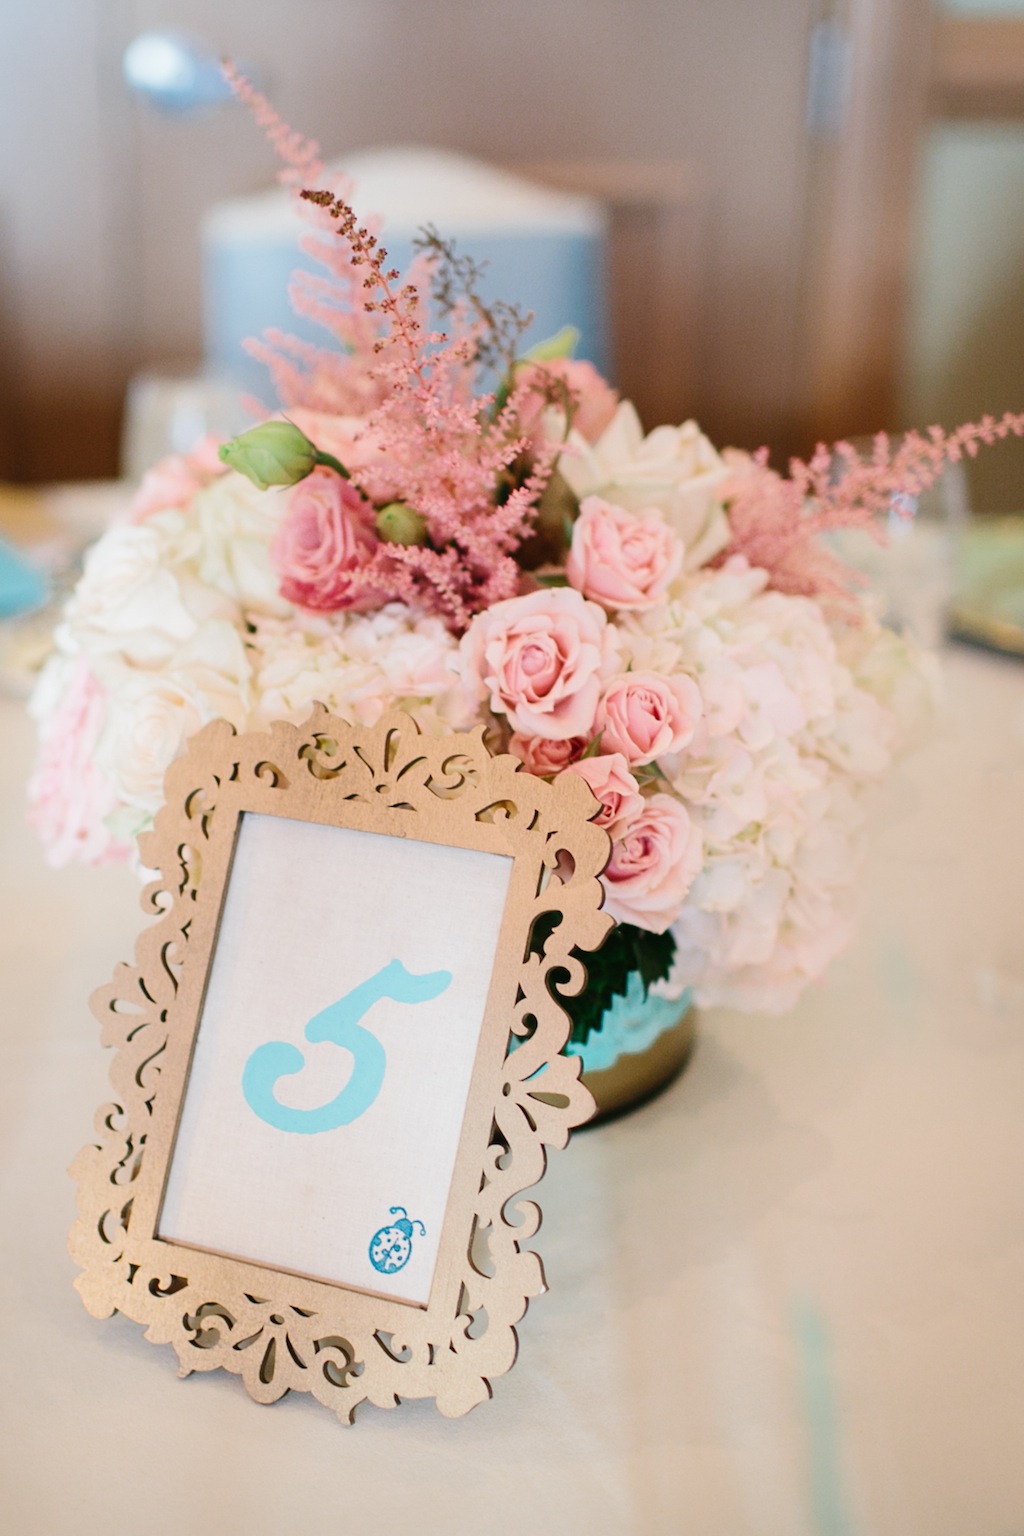 Light Pink Rose Wedding Centerpieces with Light Blue, Turquoise Table Numbers